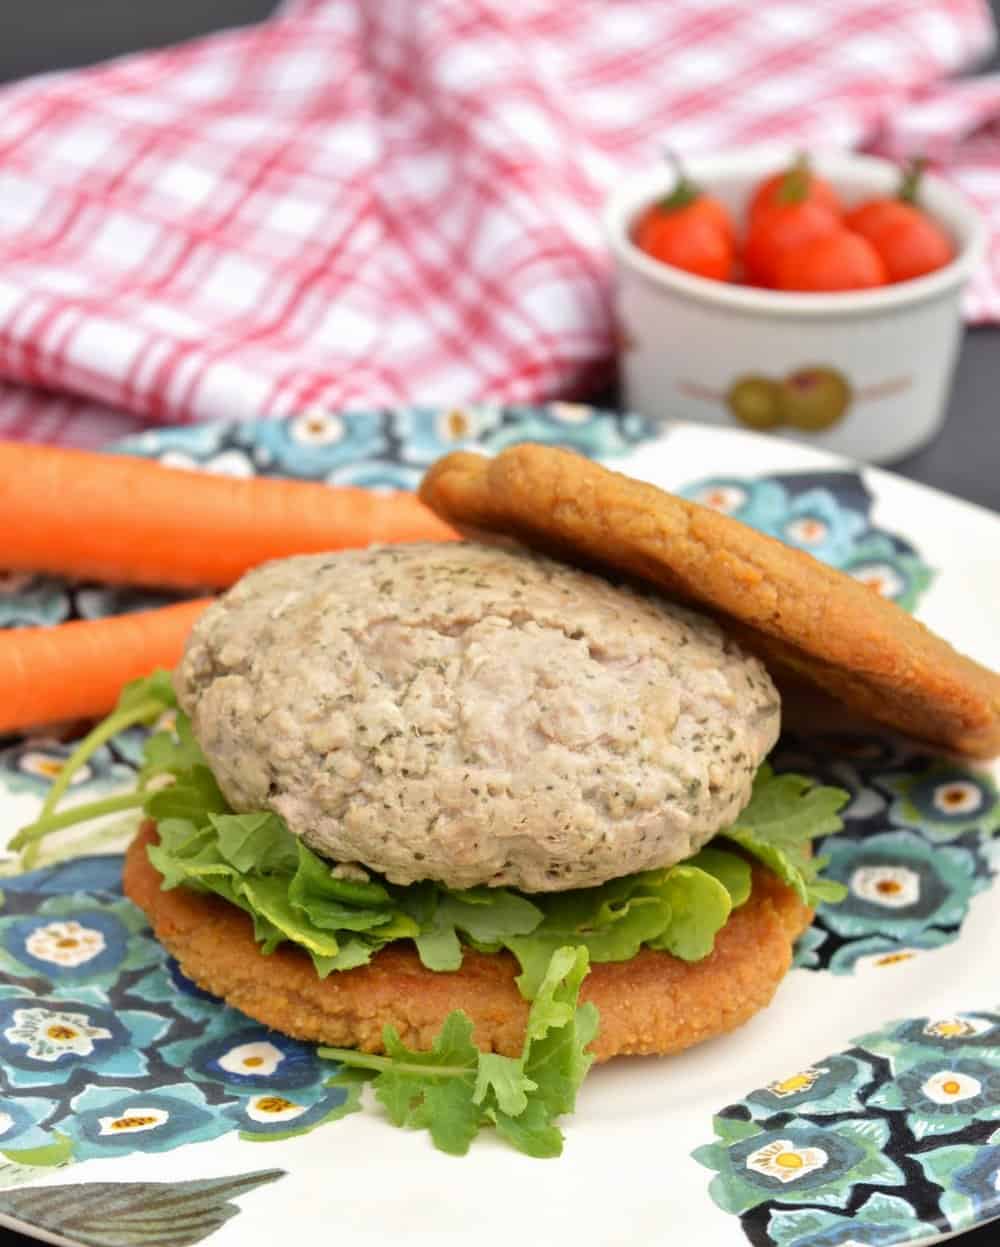 A pork burger in a bun with lettuce and carrots on the plate with it.